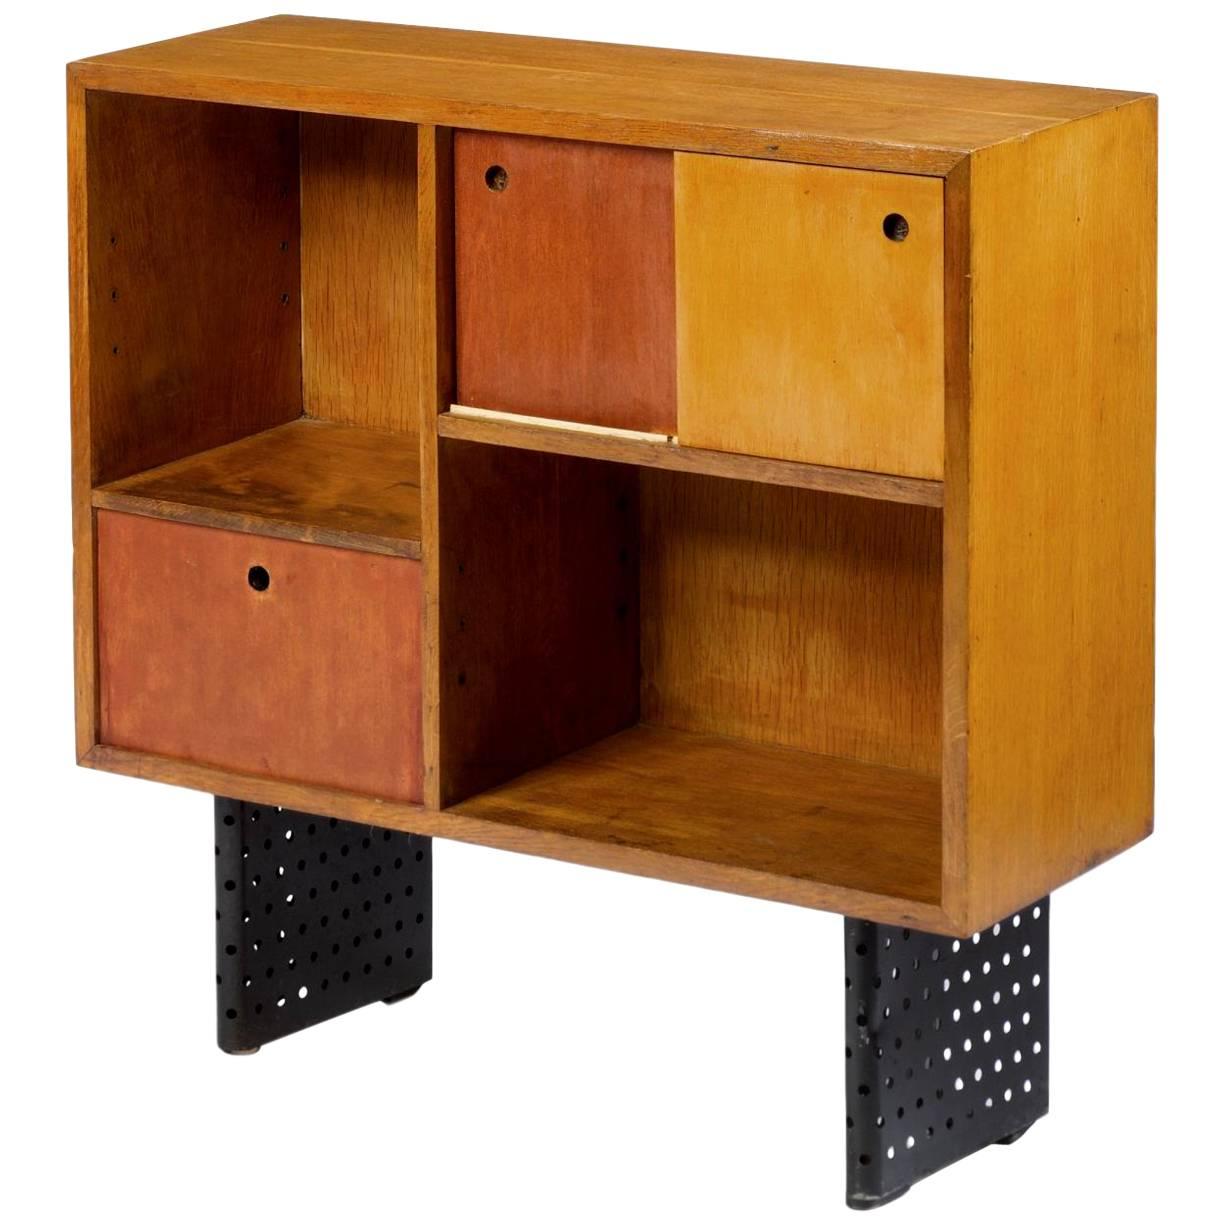 Super rare Escande cabinet. Designed for University D' Antony. Escande was a student of Prouve. This design bears a striking resemblance to some of Prouve's best pieces. Hardly ever available for sale. Oak frame with sliding doors, two inset cubby